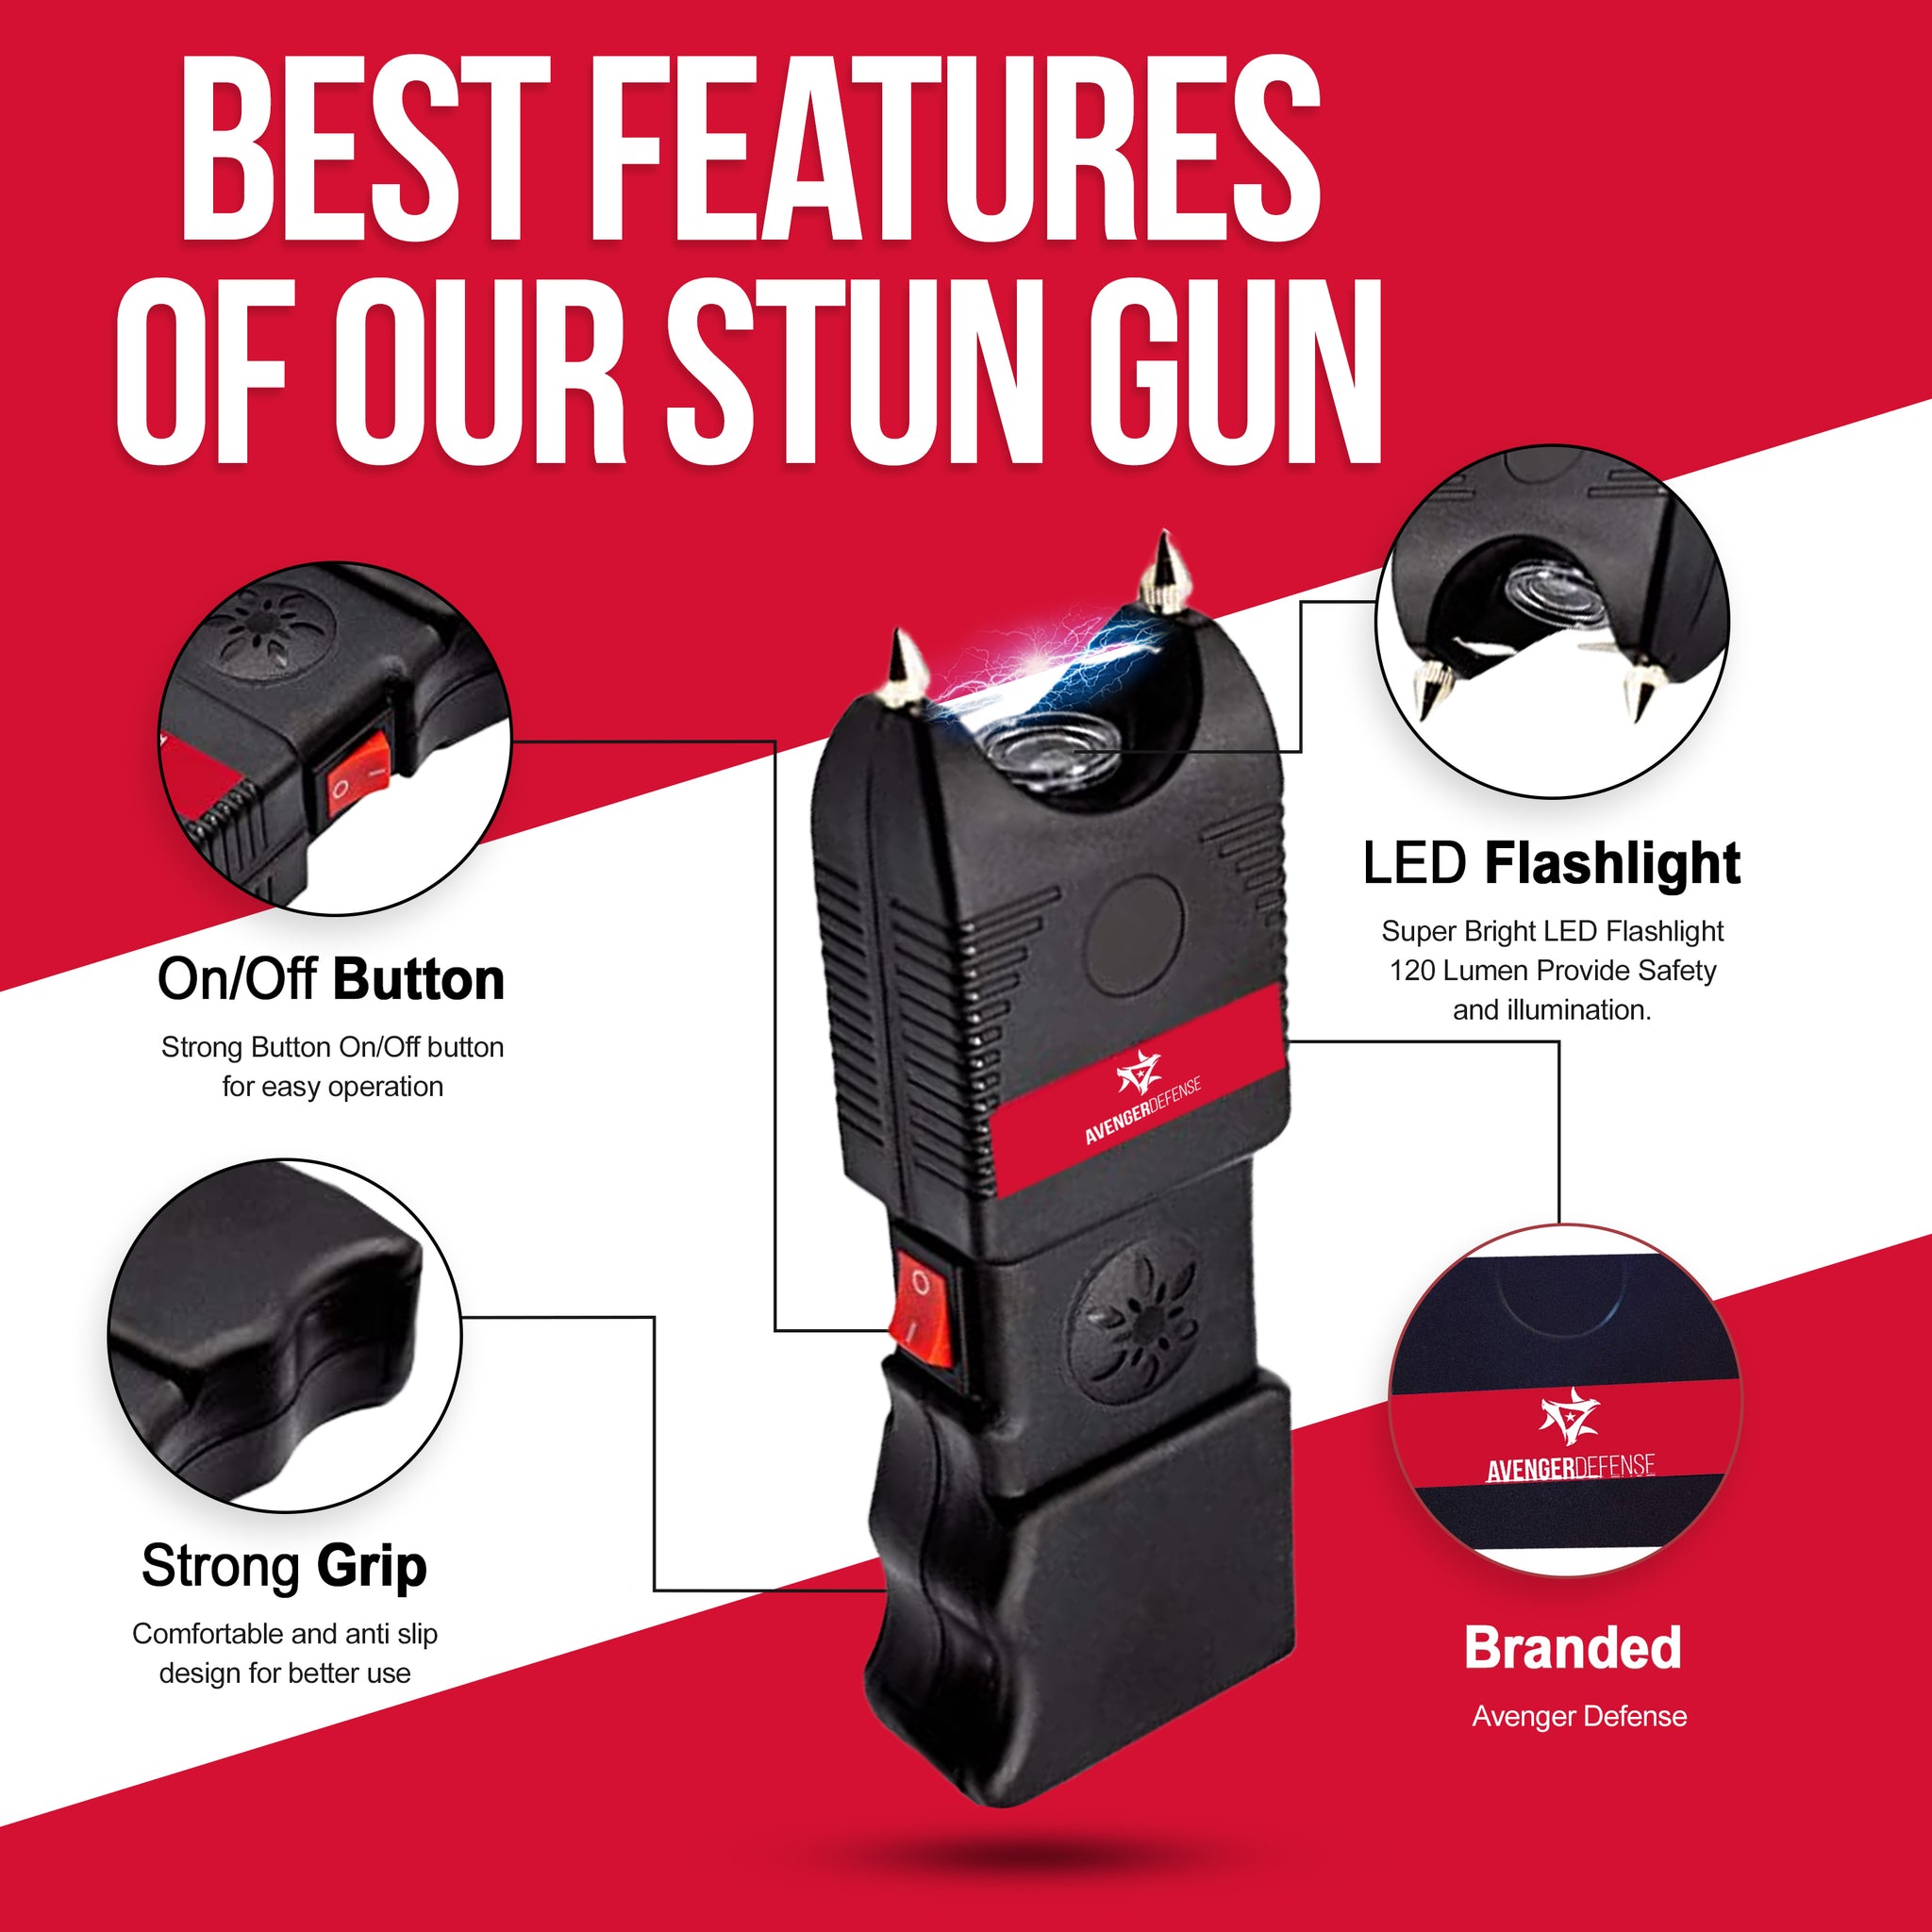 Stun Gun for Self Defense and Protection – Rechargeable, Built-In LED Flashlight and Extremely Loud Alarm